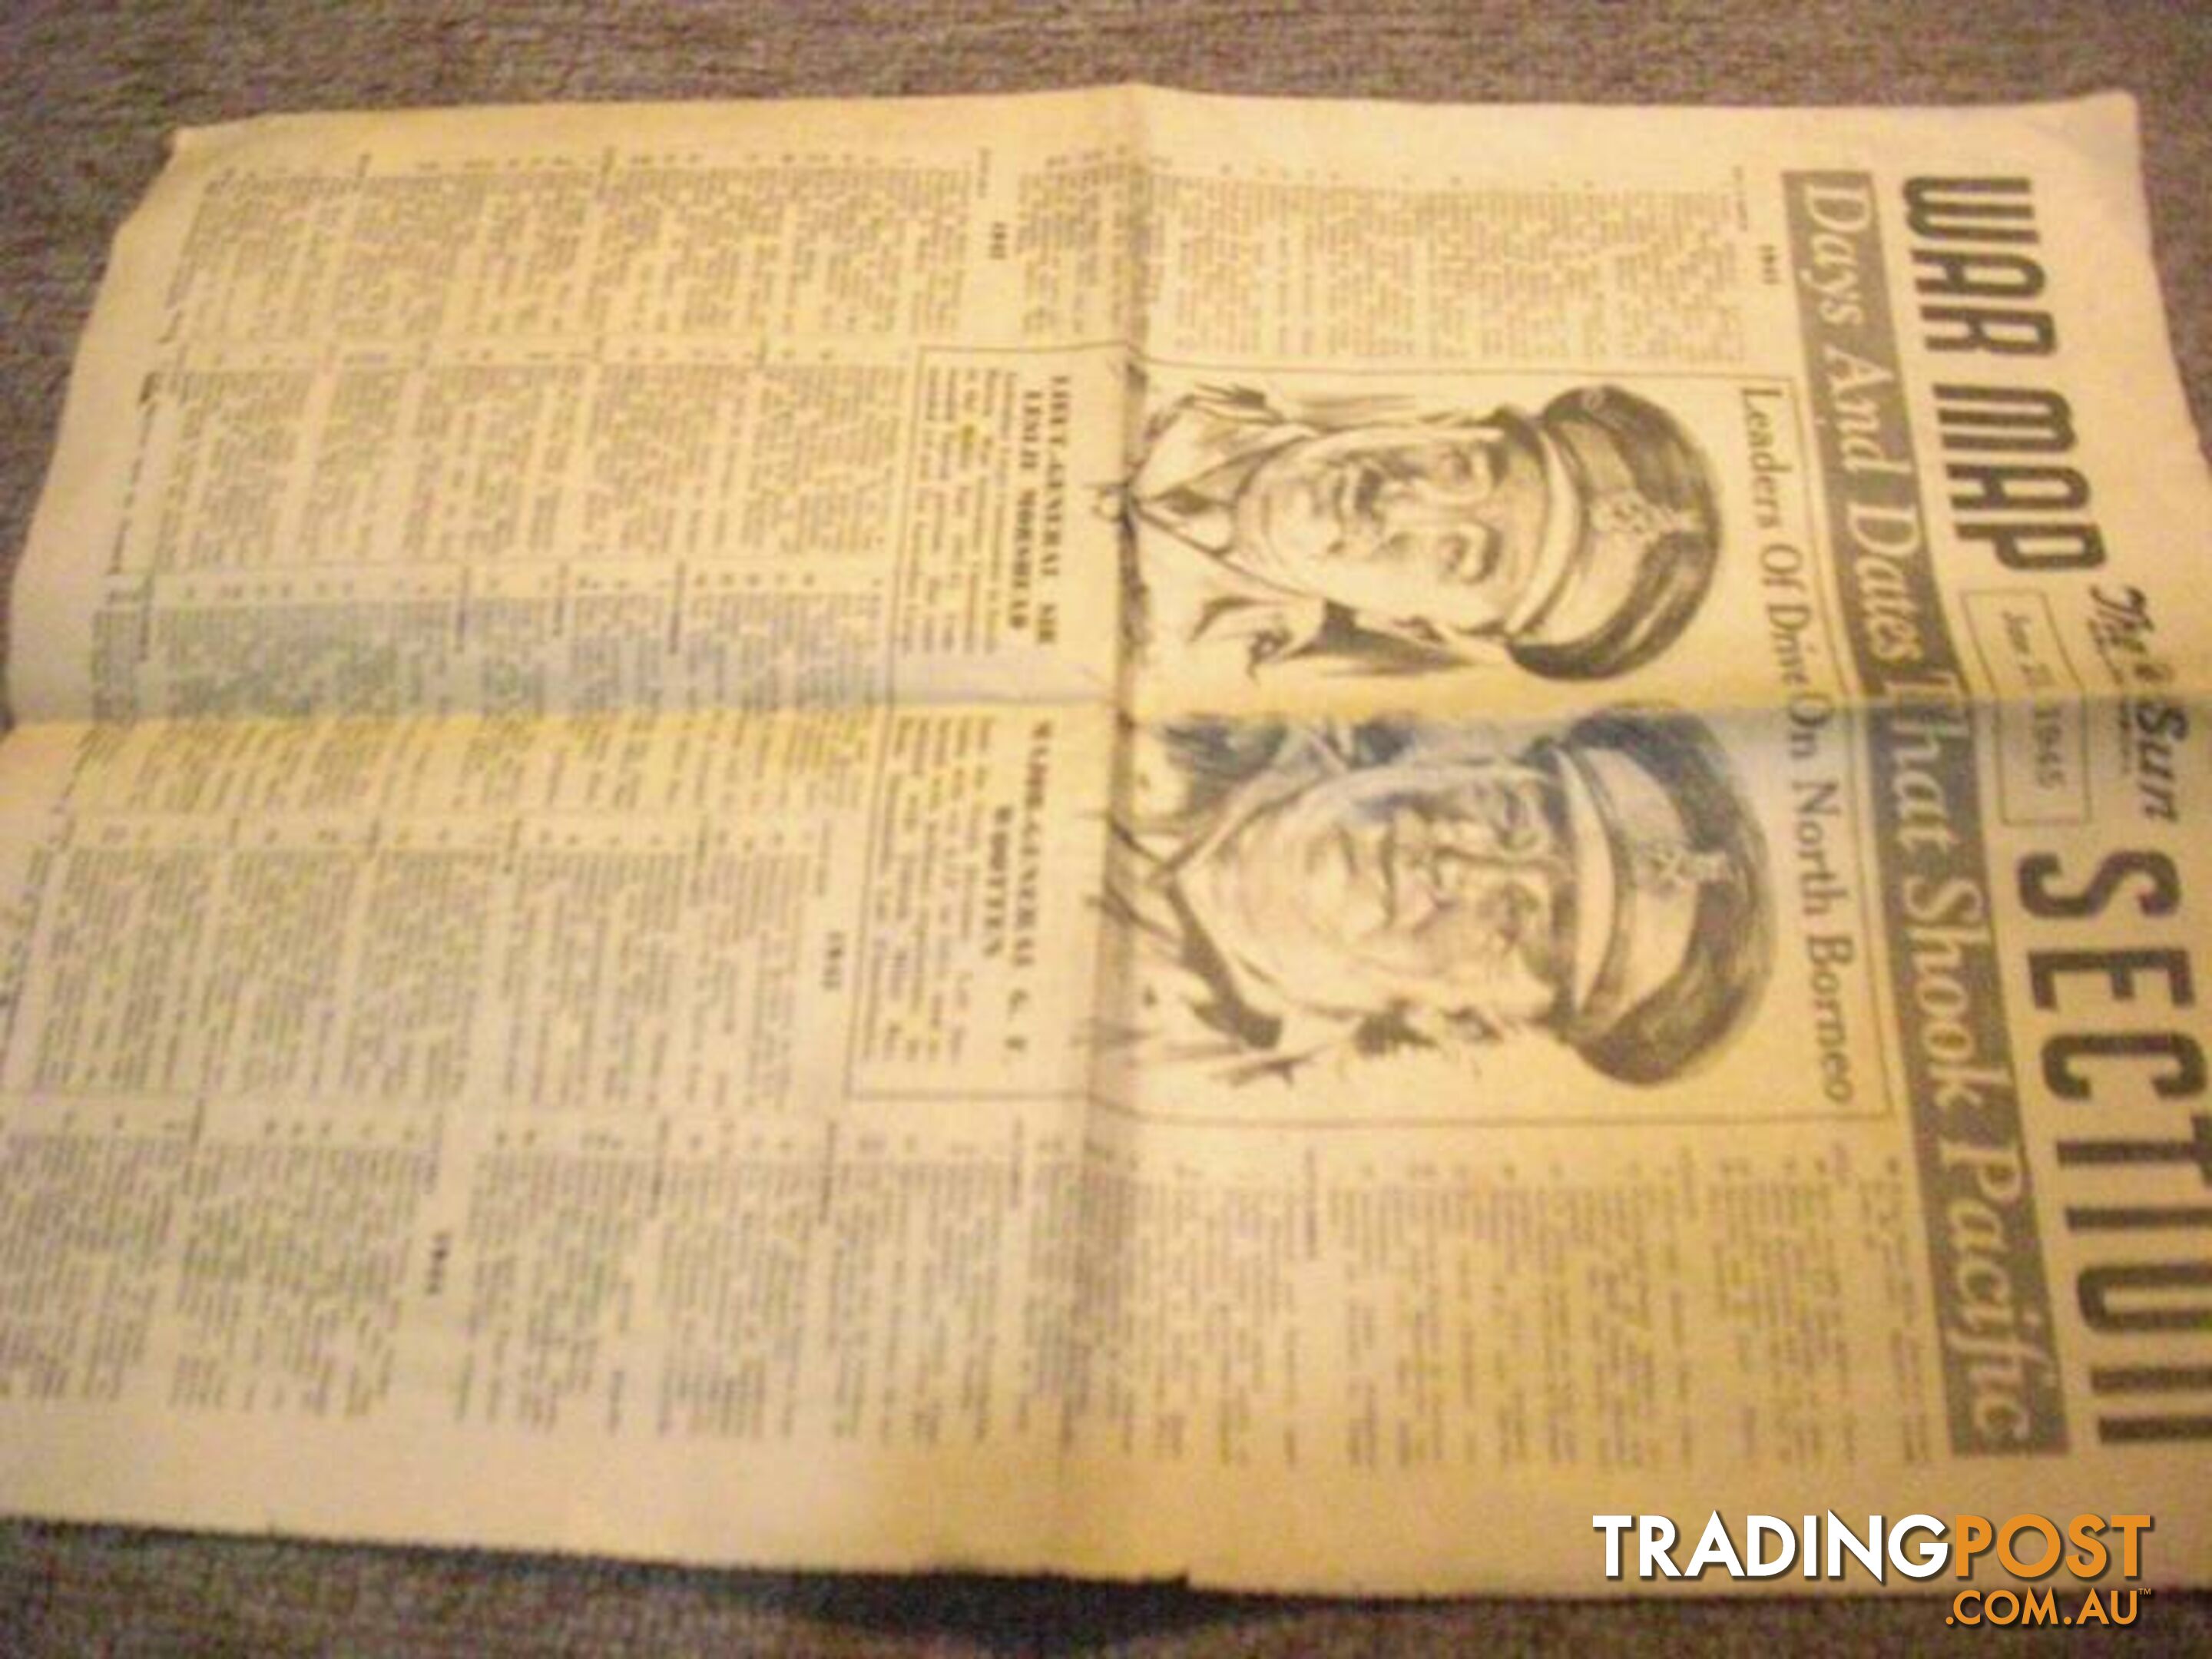 THE SUN JUNE 23 1945 FRONT PAGE +WAR MAPS 72 YEARS OLD THE SUN